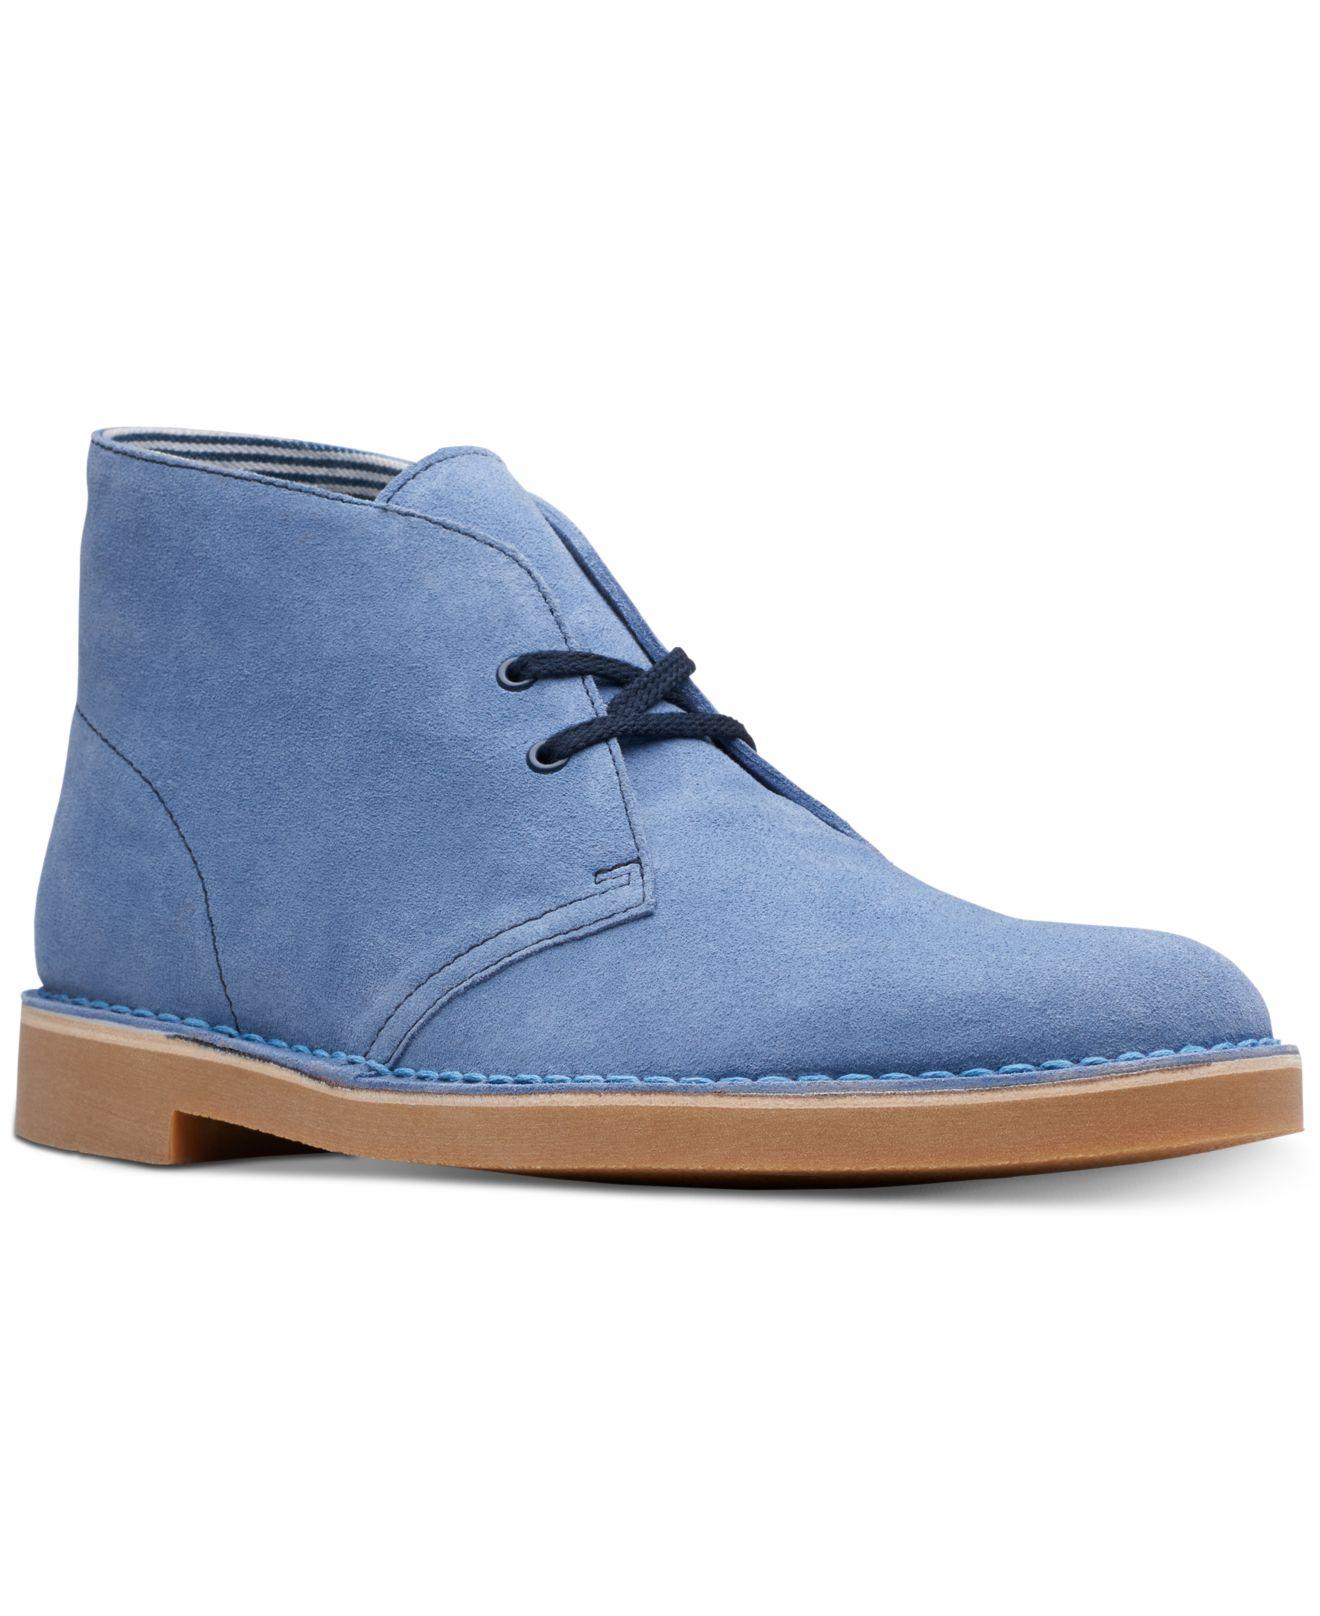 Clarks Suede Bushacre 2 Chukka Boots in Blue for Men - Lyst